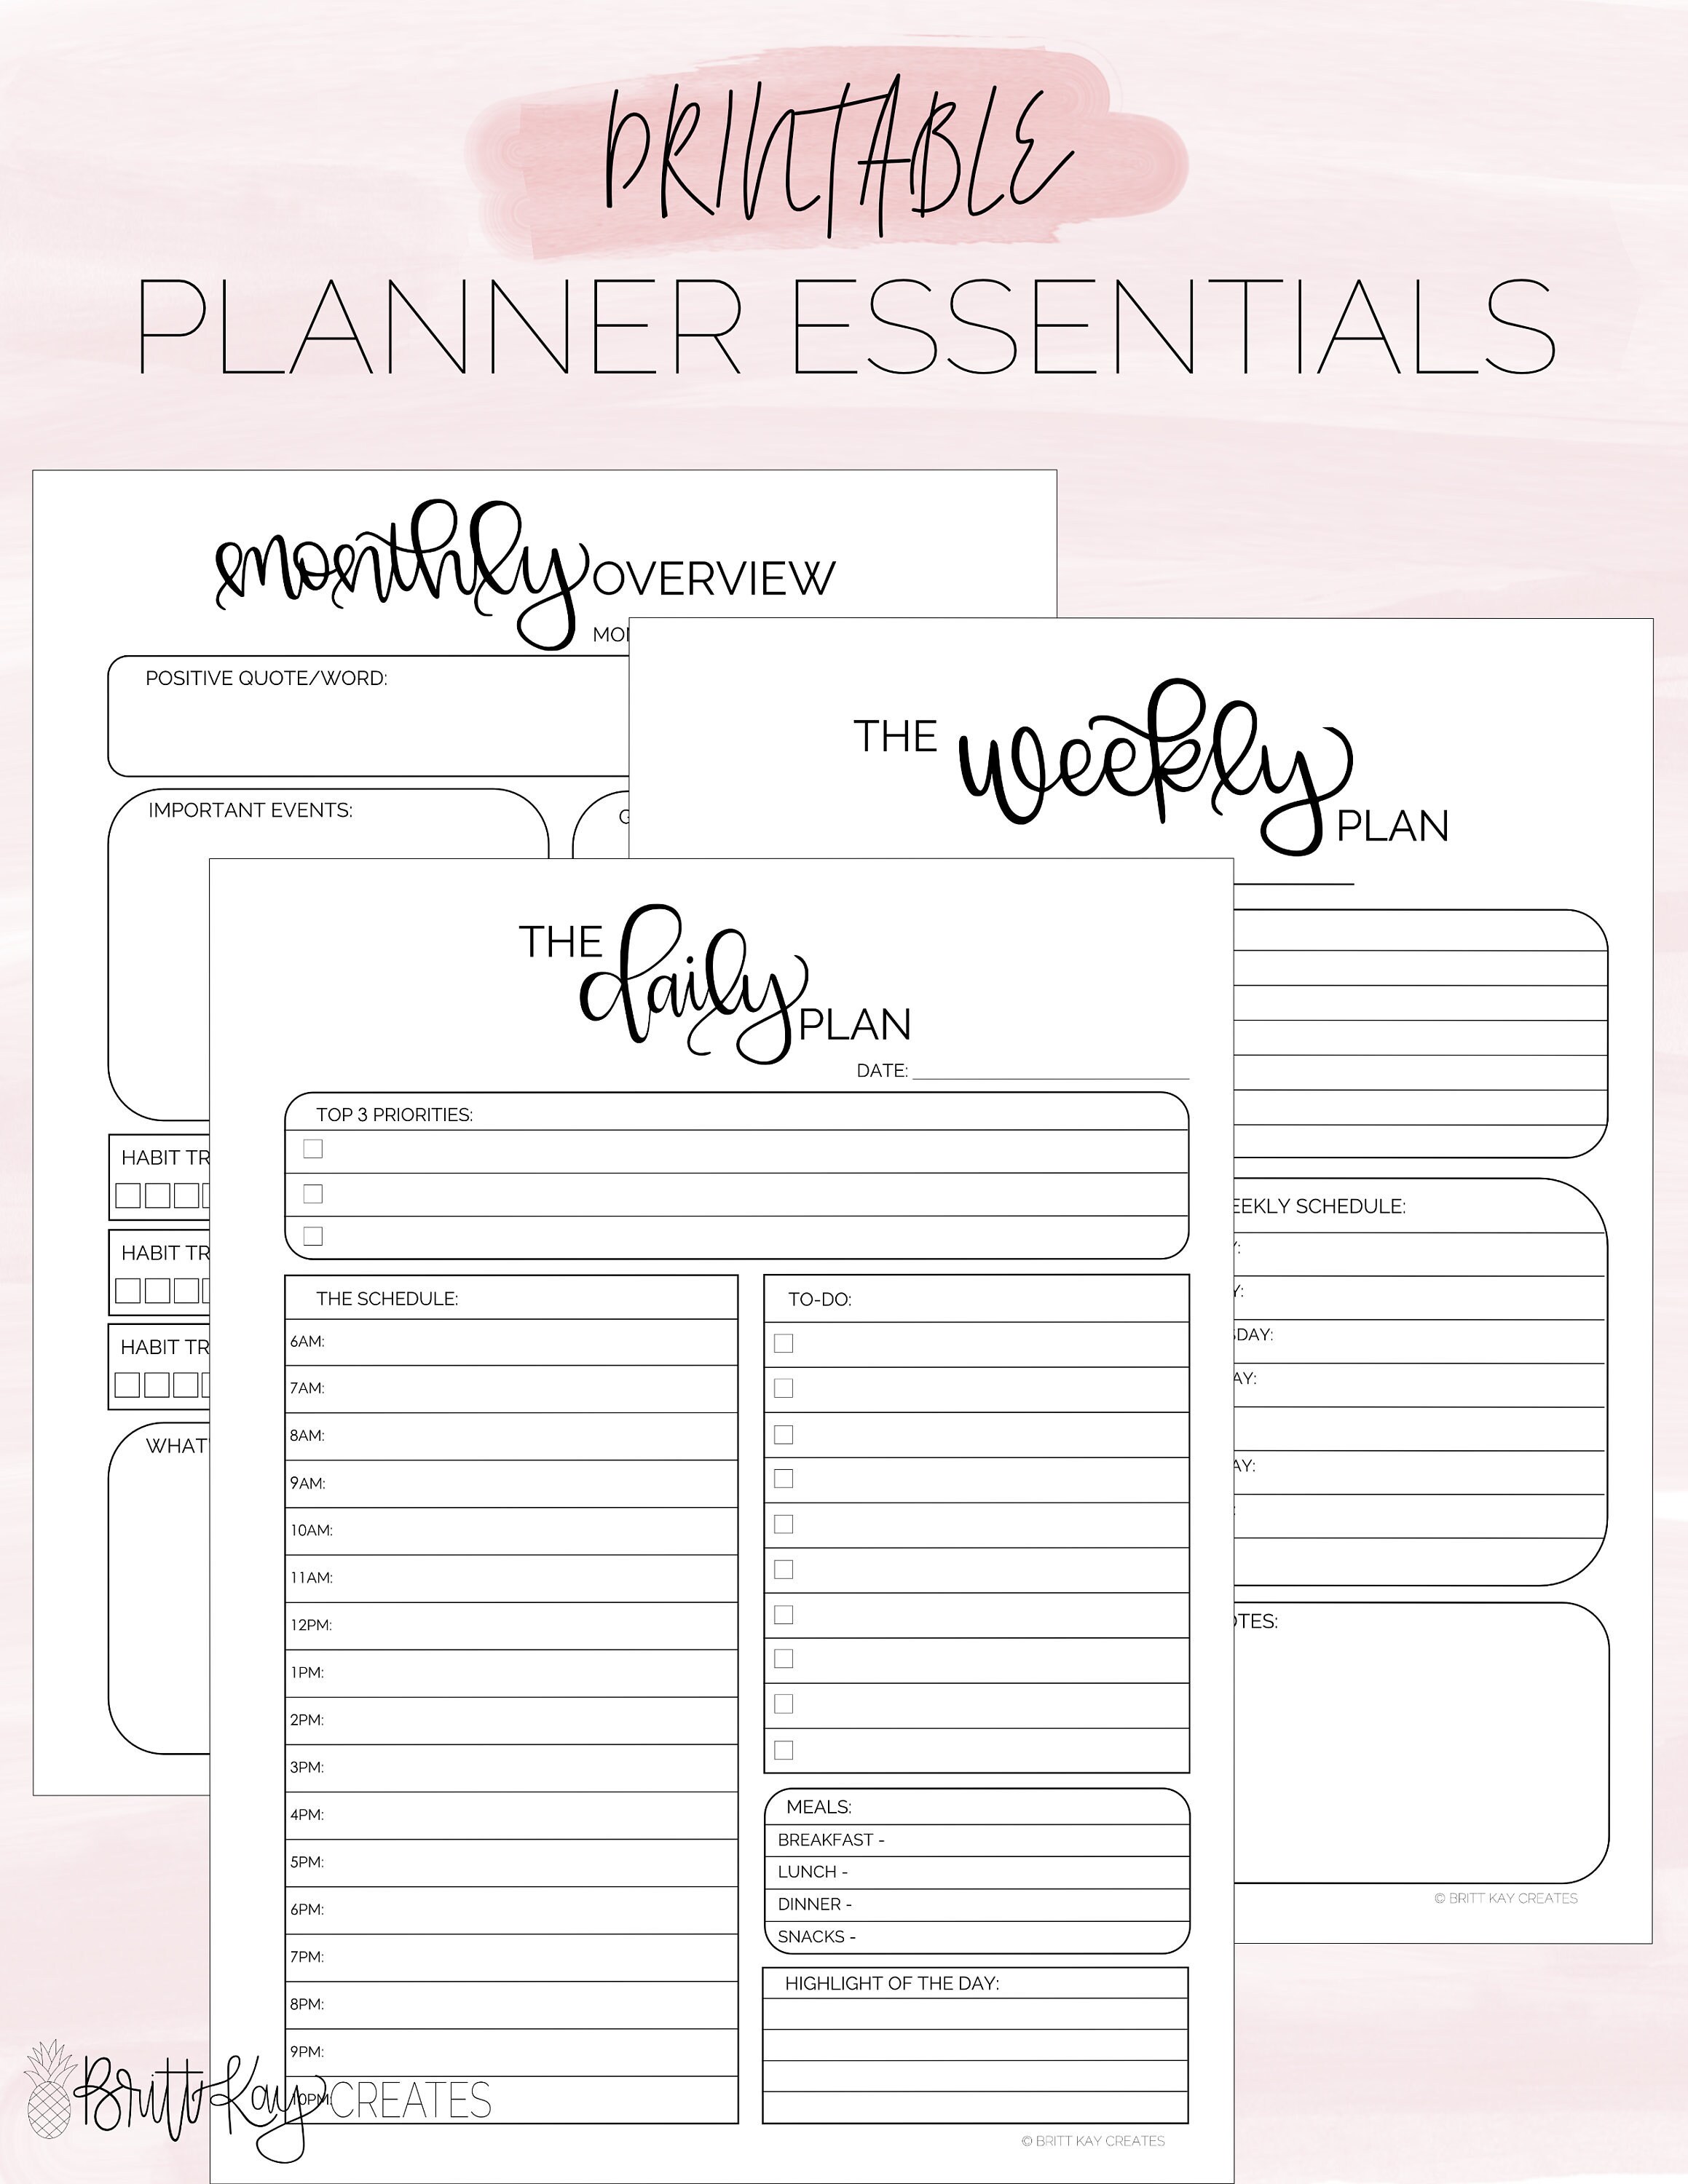 BIG Happy Planner Printable Weekly Planner Monthly Overview | Etsy